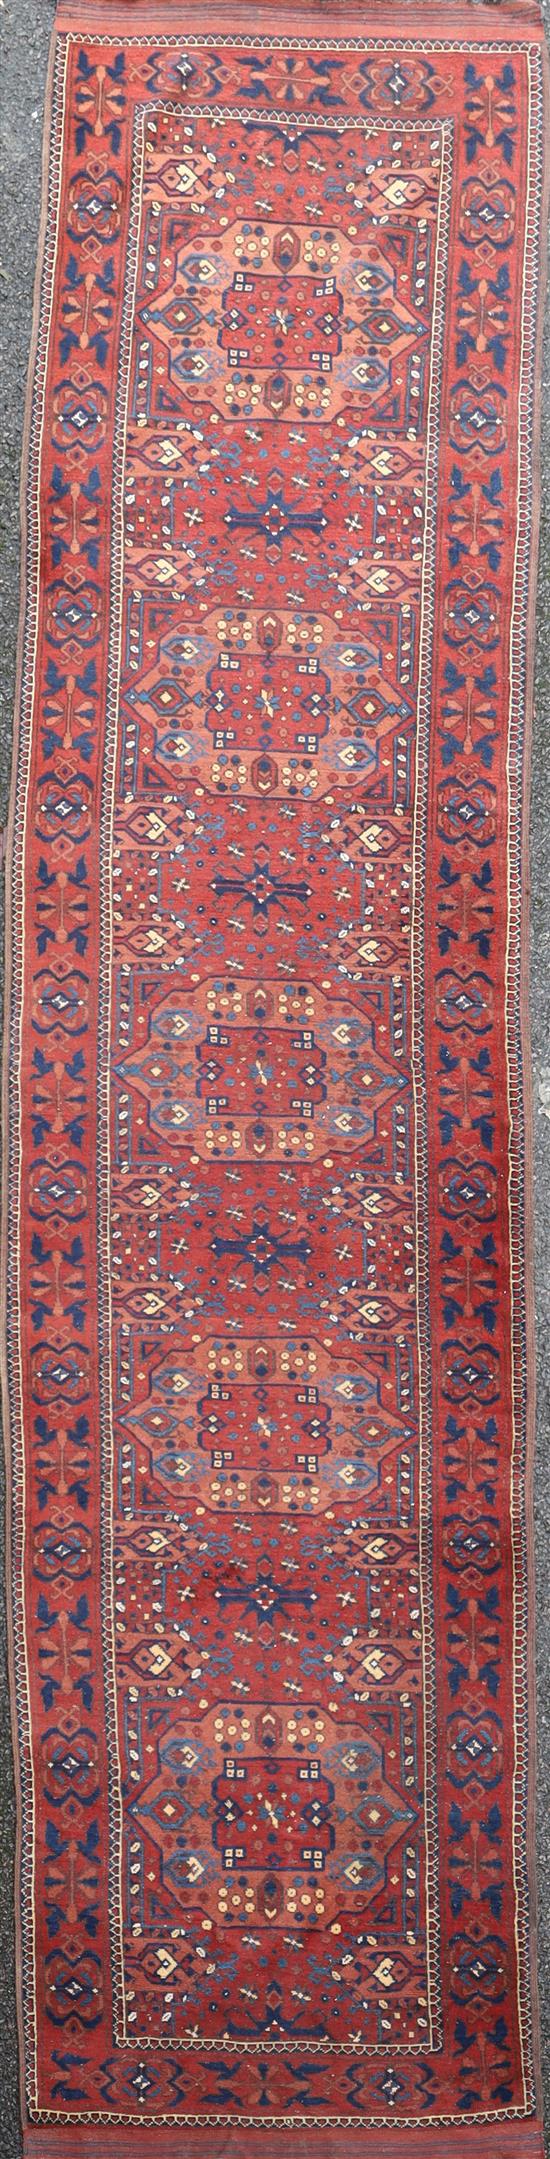 An Ersari red ground runner, 13ft by 3ft 6in.